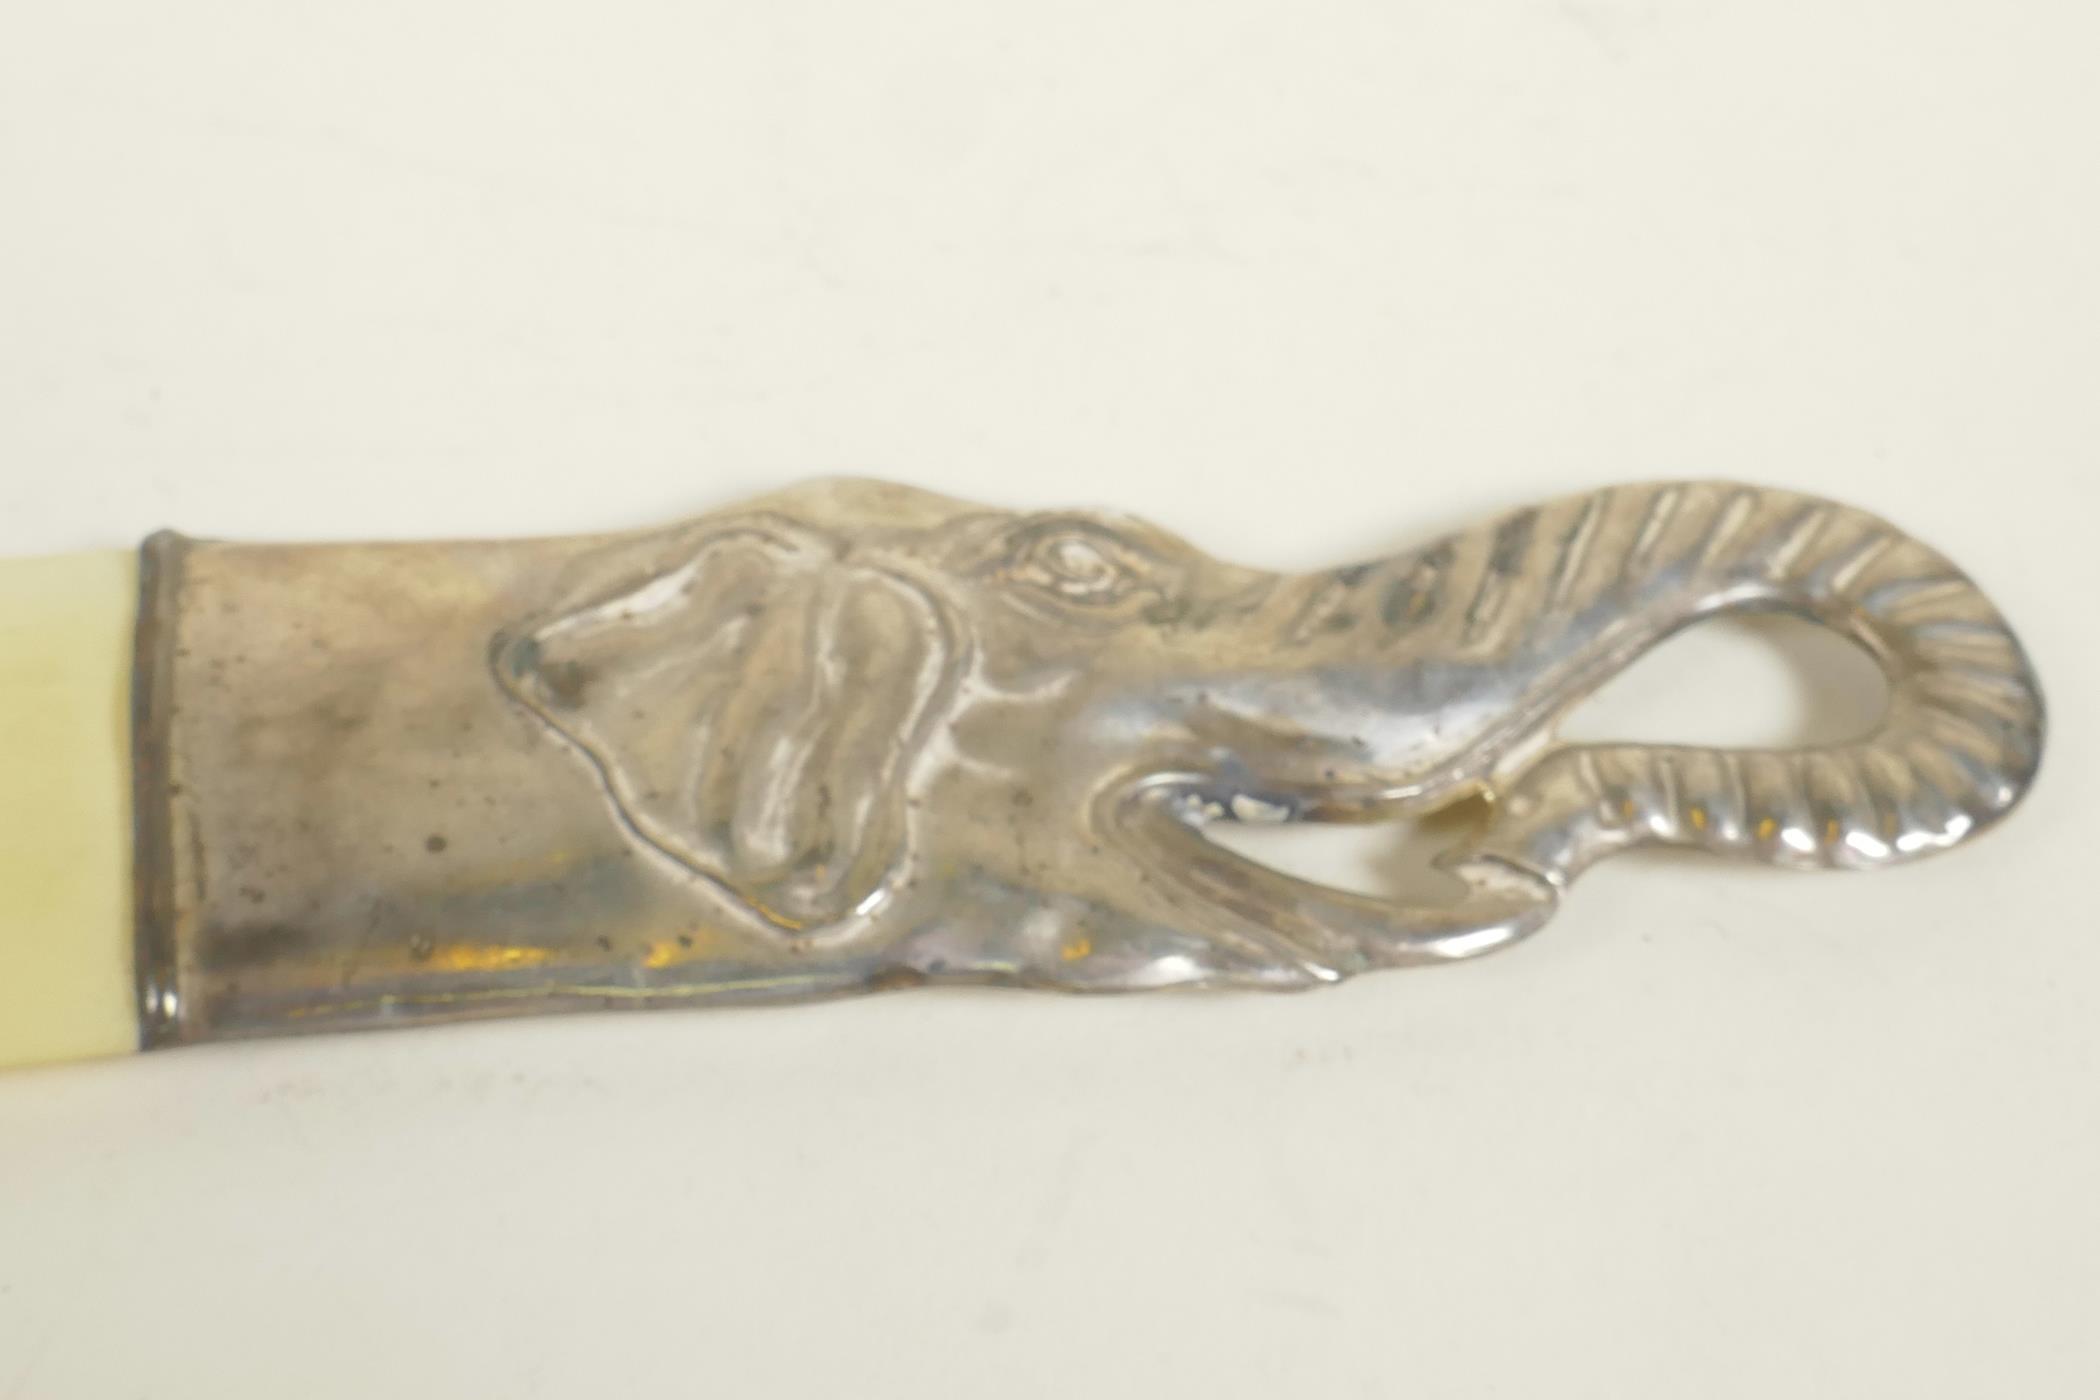 A bone letter opener with silver plated elephant's head handle, 10½" long - Image 2 of 3